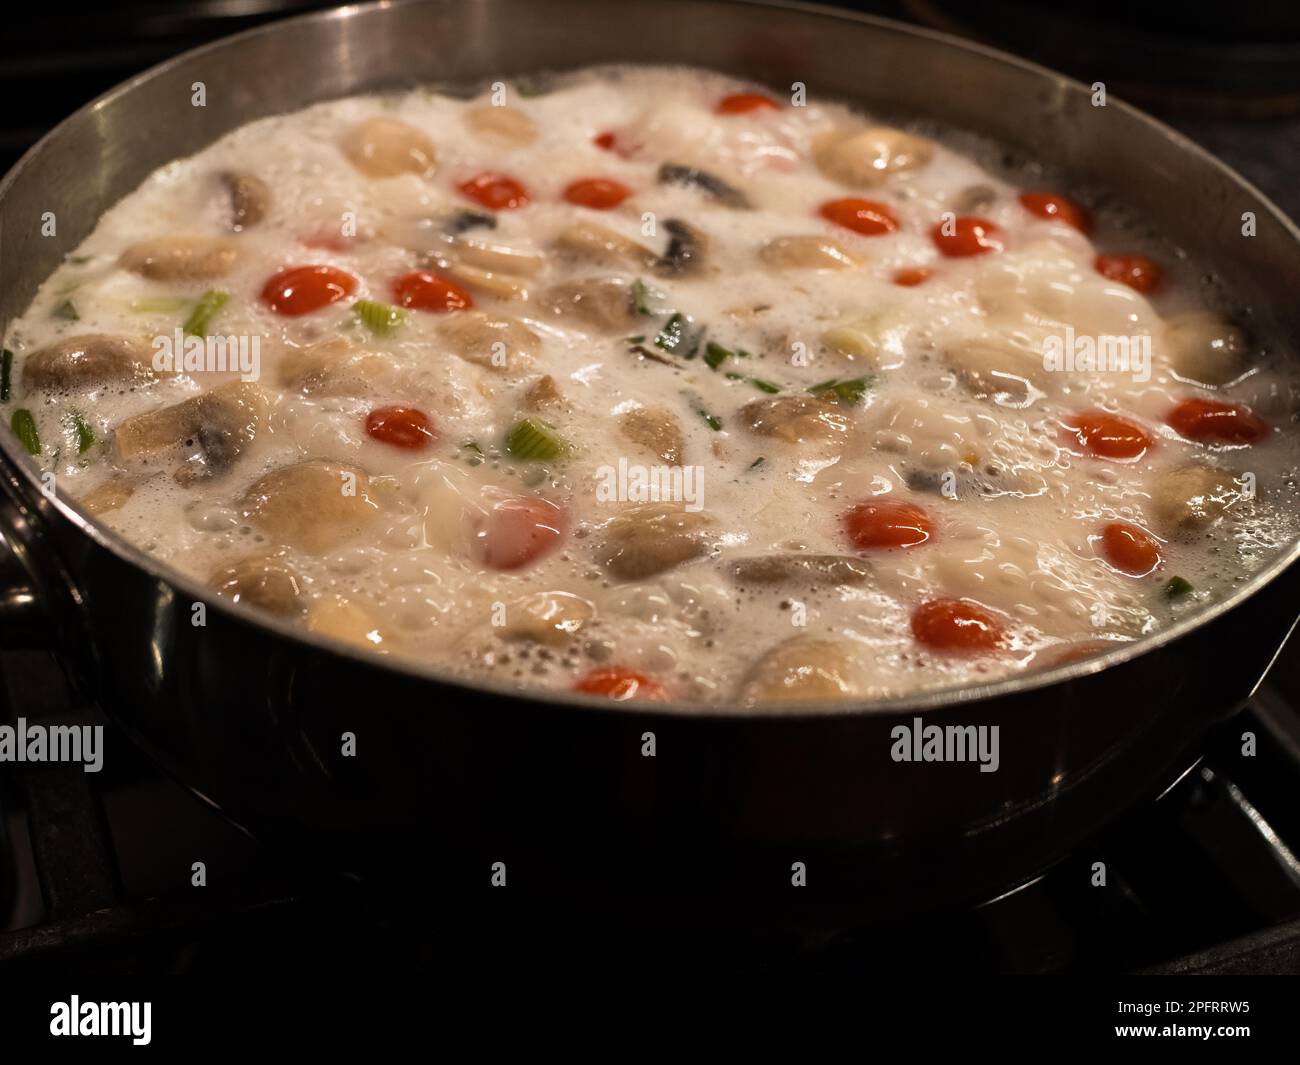 Delicious Thai coconut soup with tomatoes in a silvery pot. Stock Photo